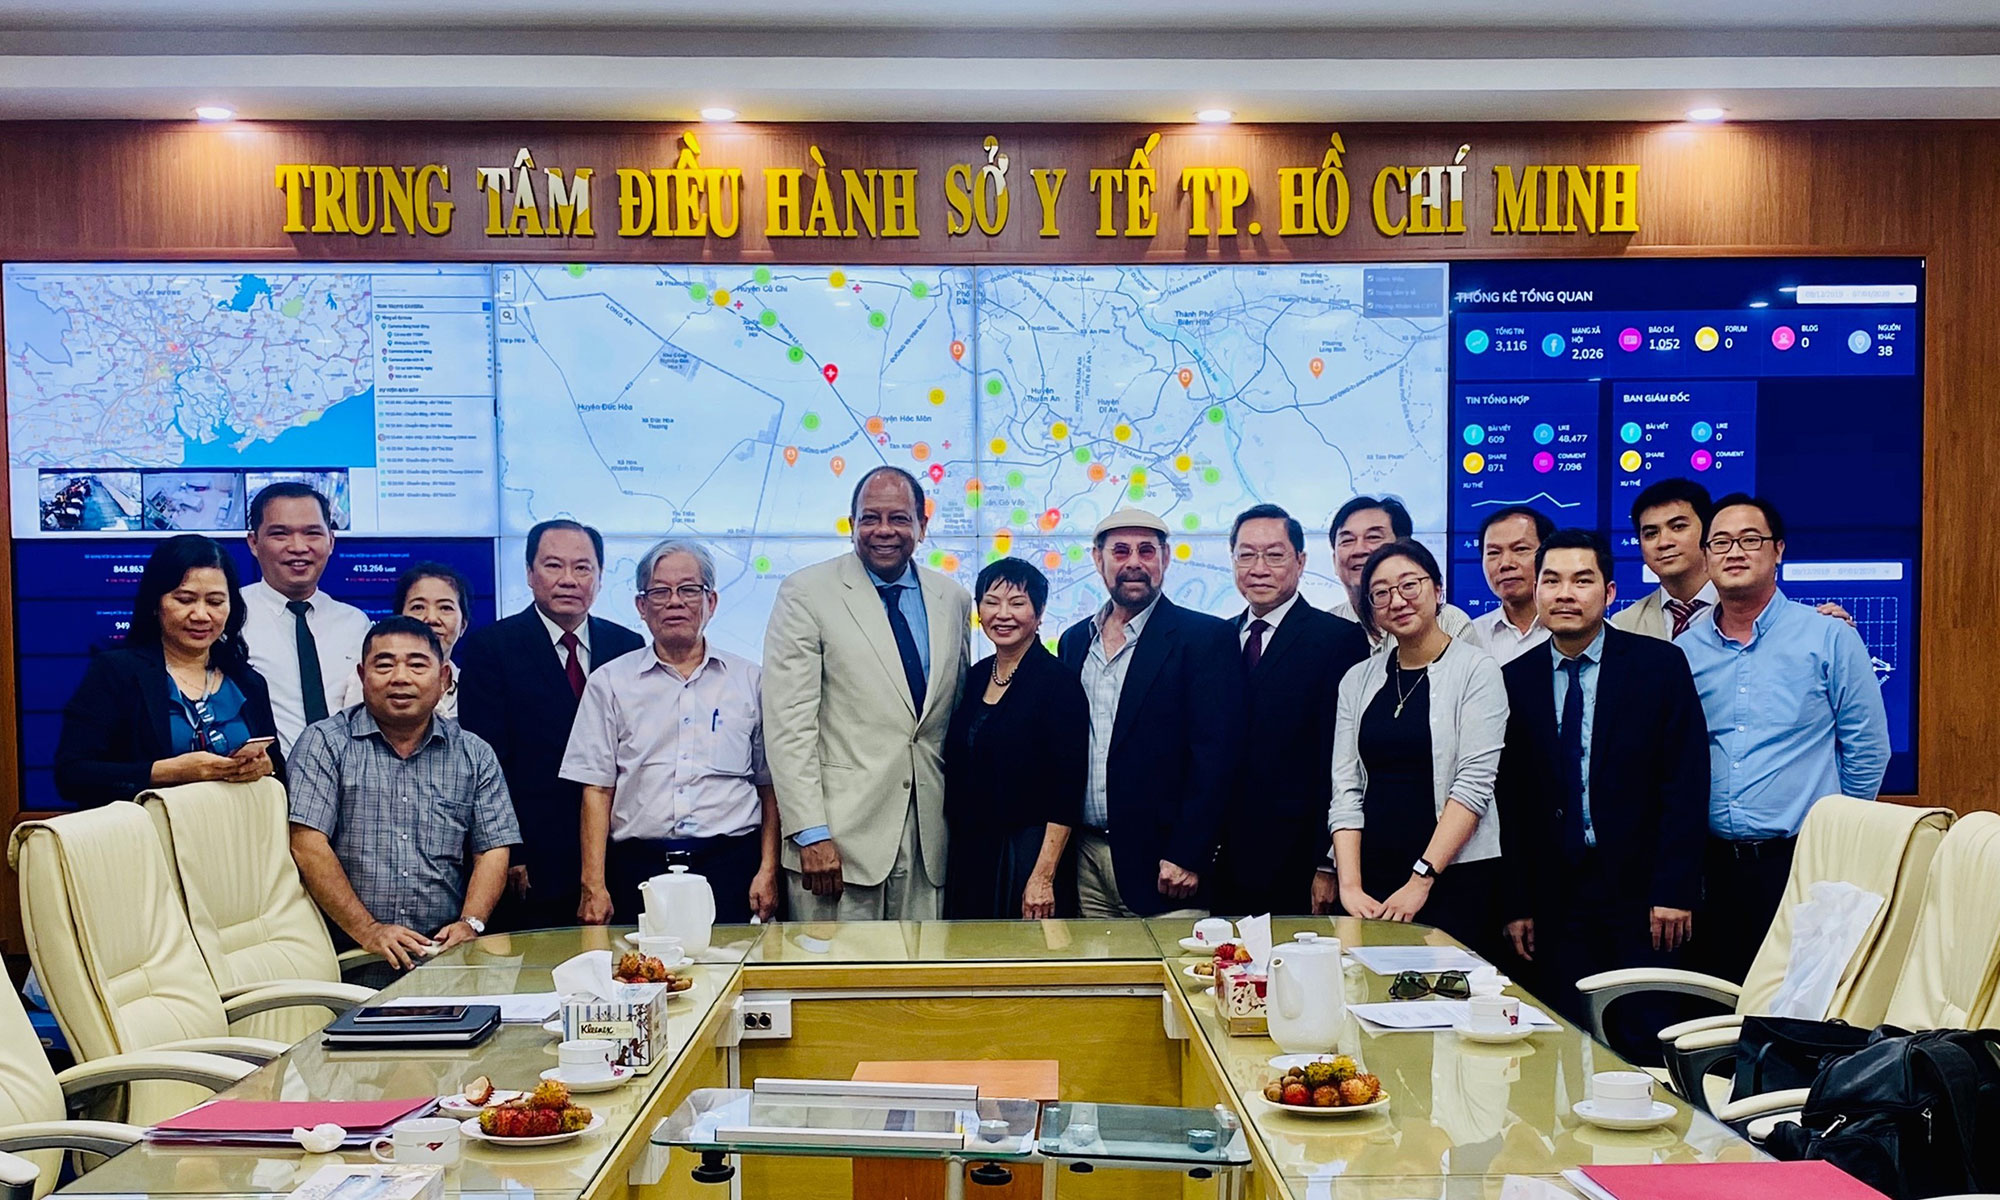 Group of Johns Hopkins physicians and officials from Ho Chi Minh city pose in front of large map of Vietnam.